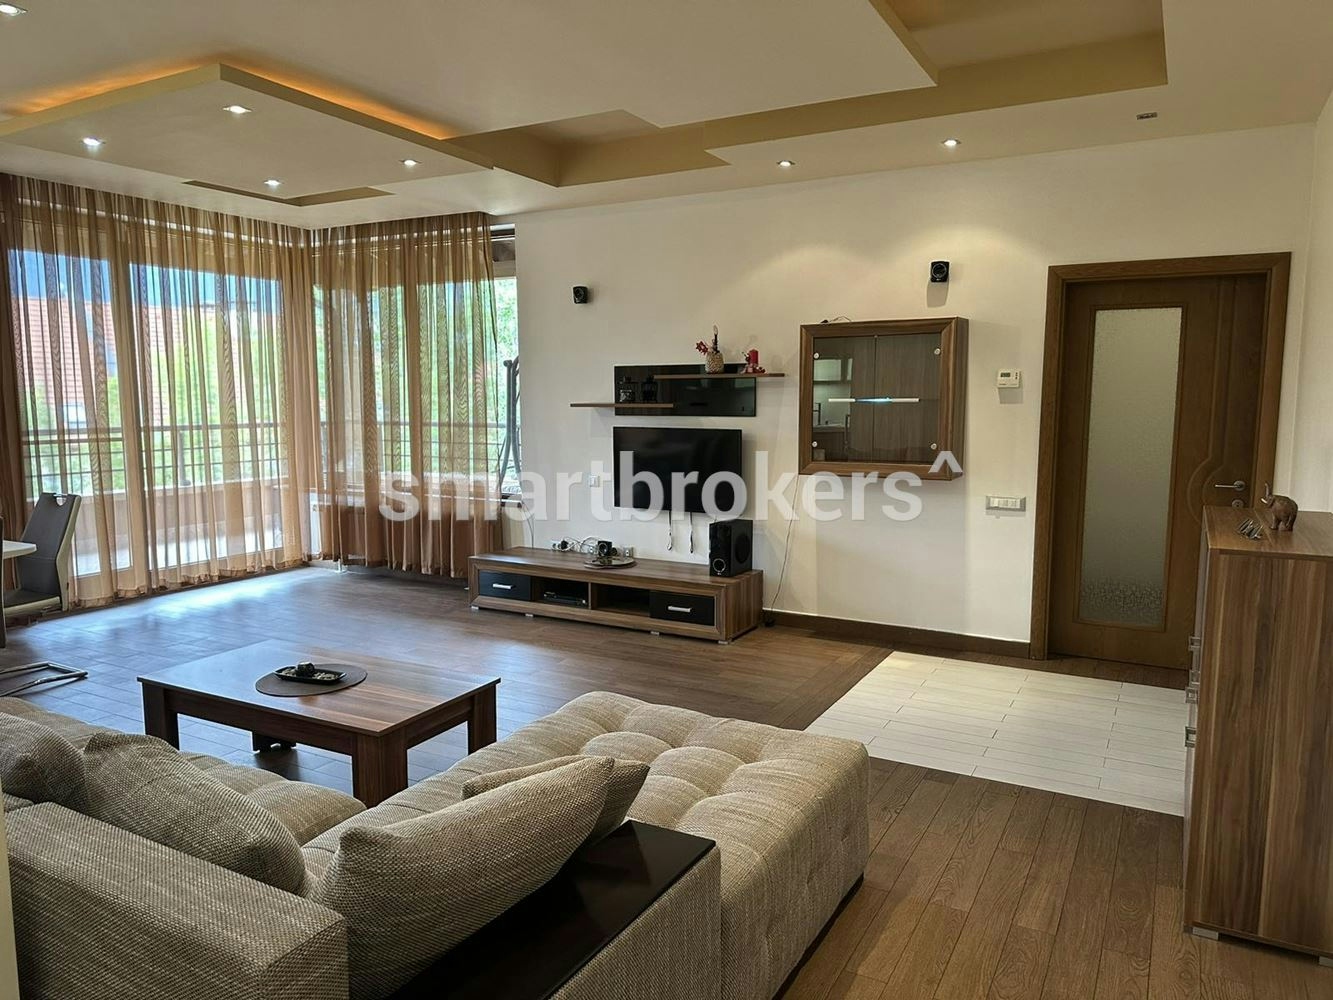 Threer-bedroom apartment for rent in the Maxi complex